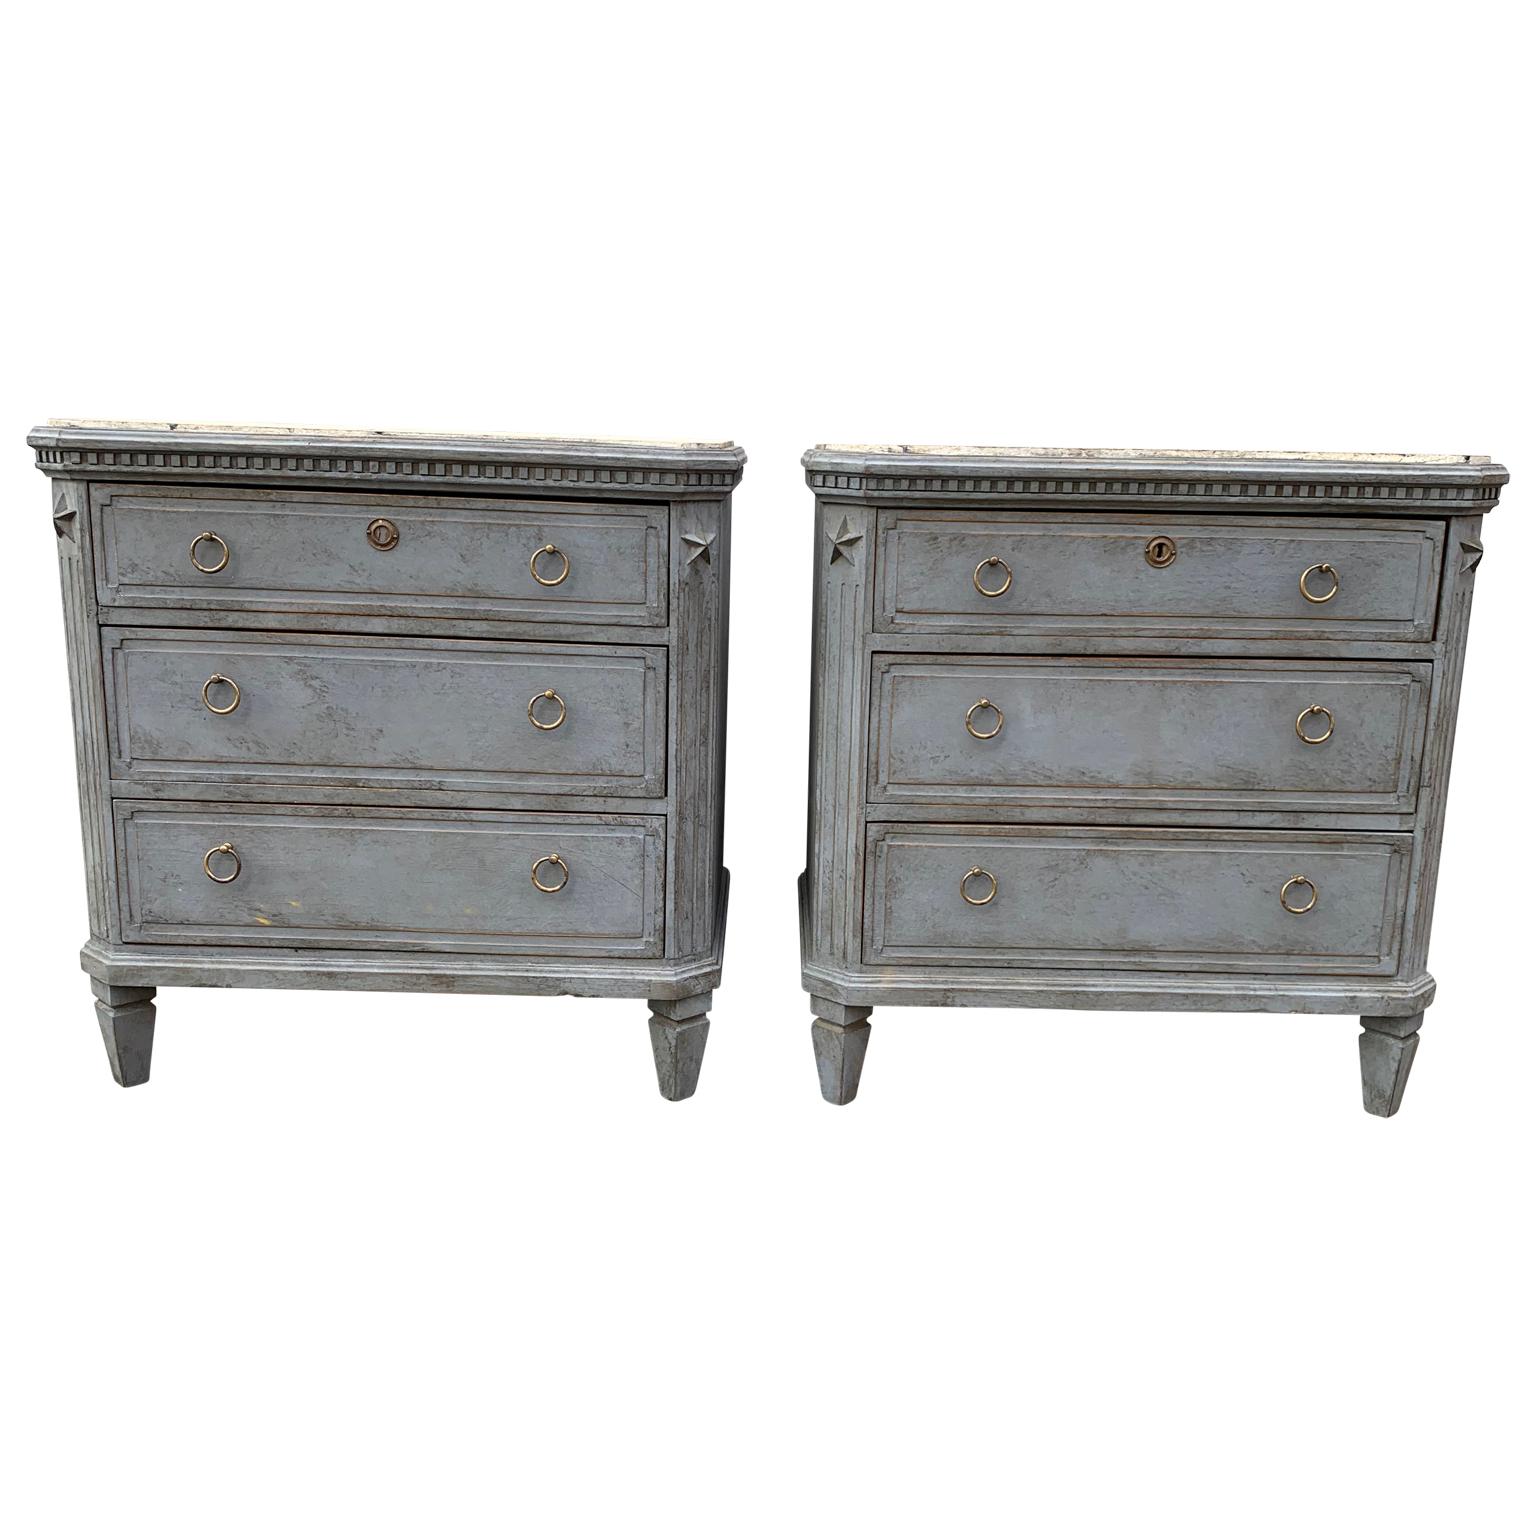 Swedish pair of painted faux marble-top Gustavian style dressers

The chests have 3 drawers with brass hardware.
Complimentary delivery to most areas of London UK, The Netherlands, Belgium, Denmark, Sweden and Northern Germany.
 